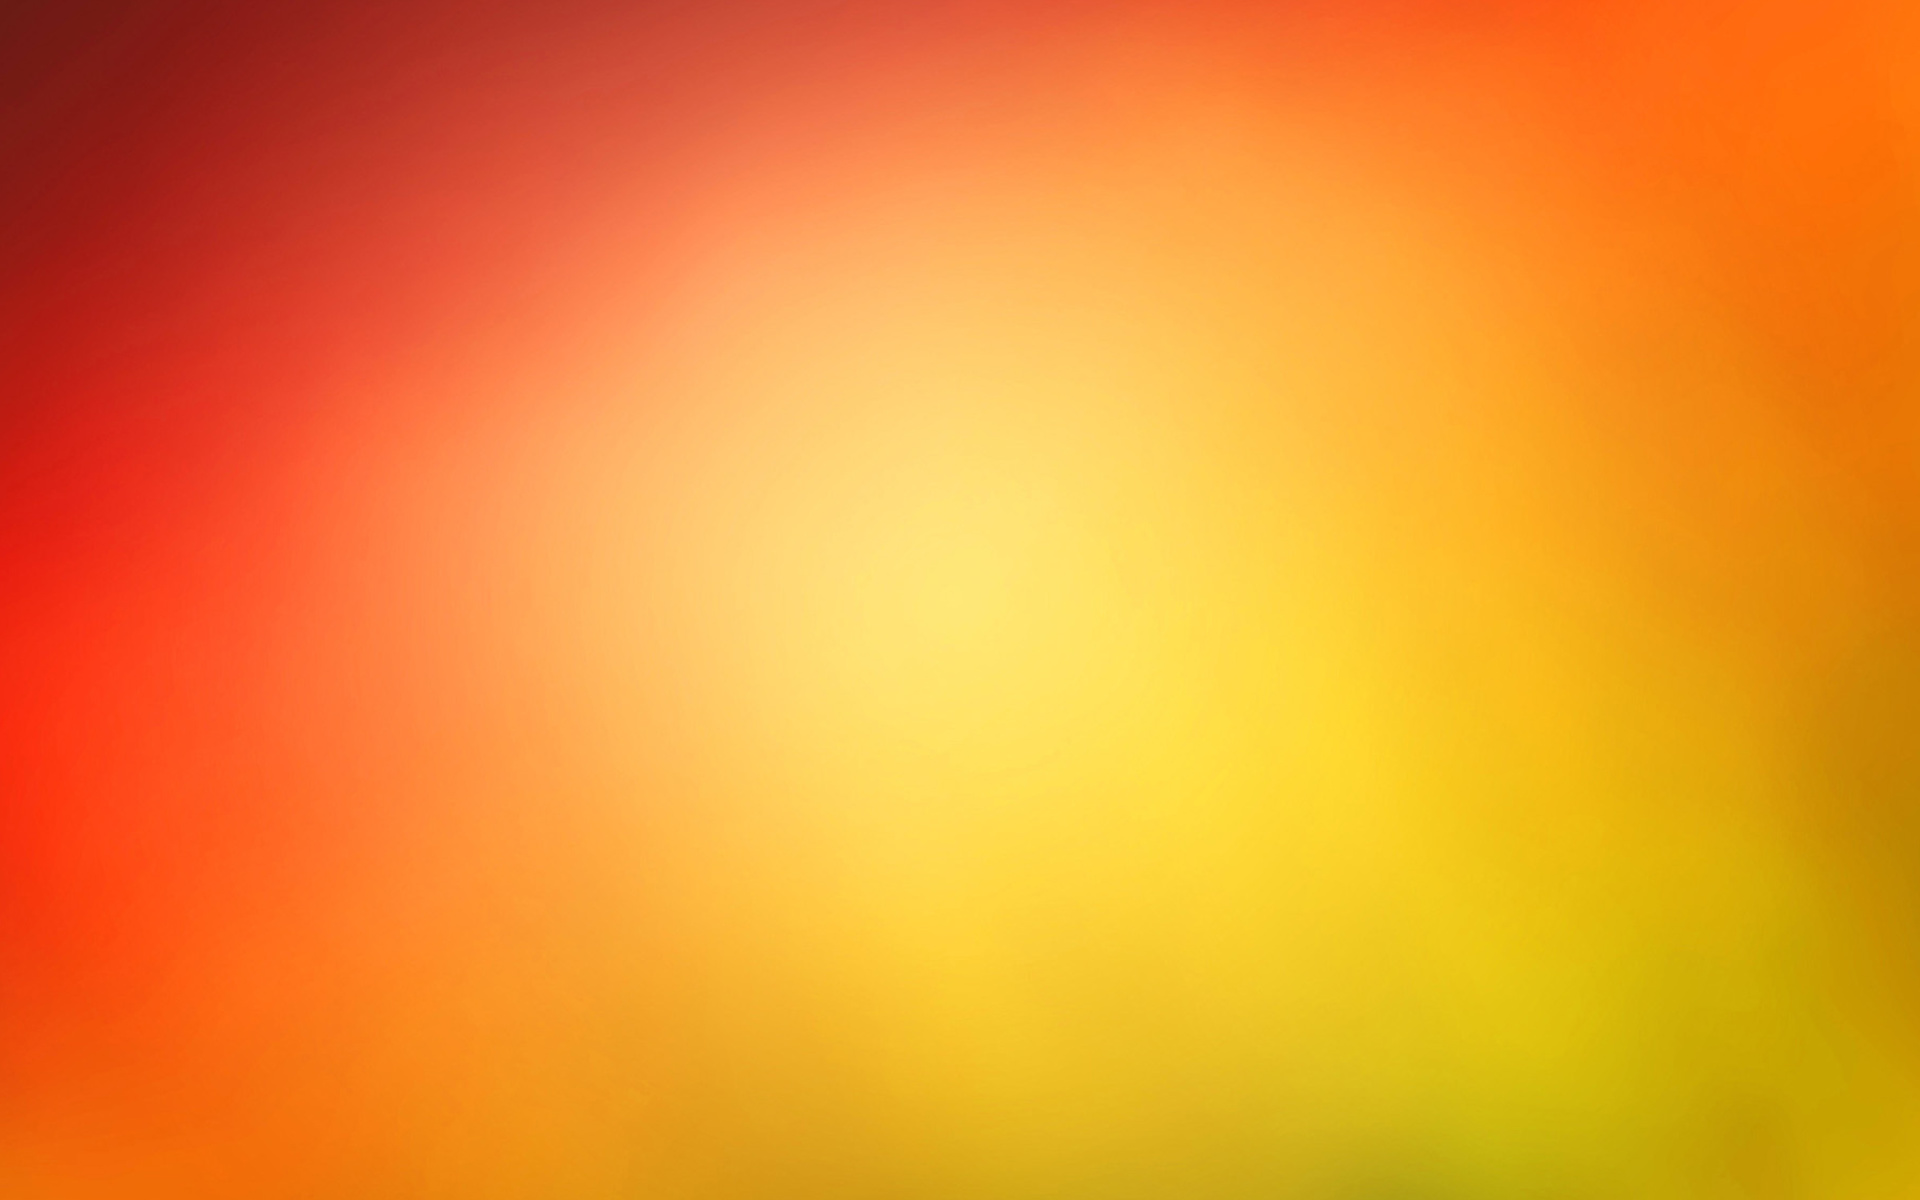 Light Colored Background wallpaper 1920x1200